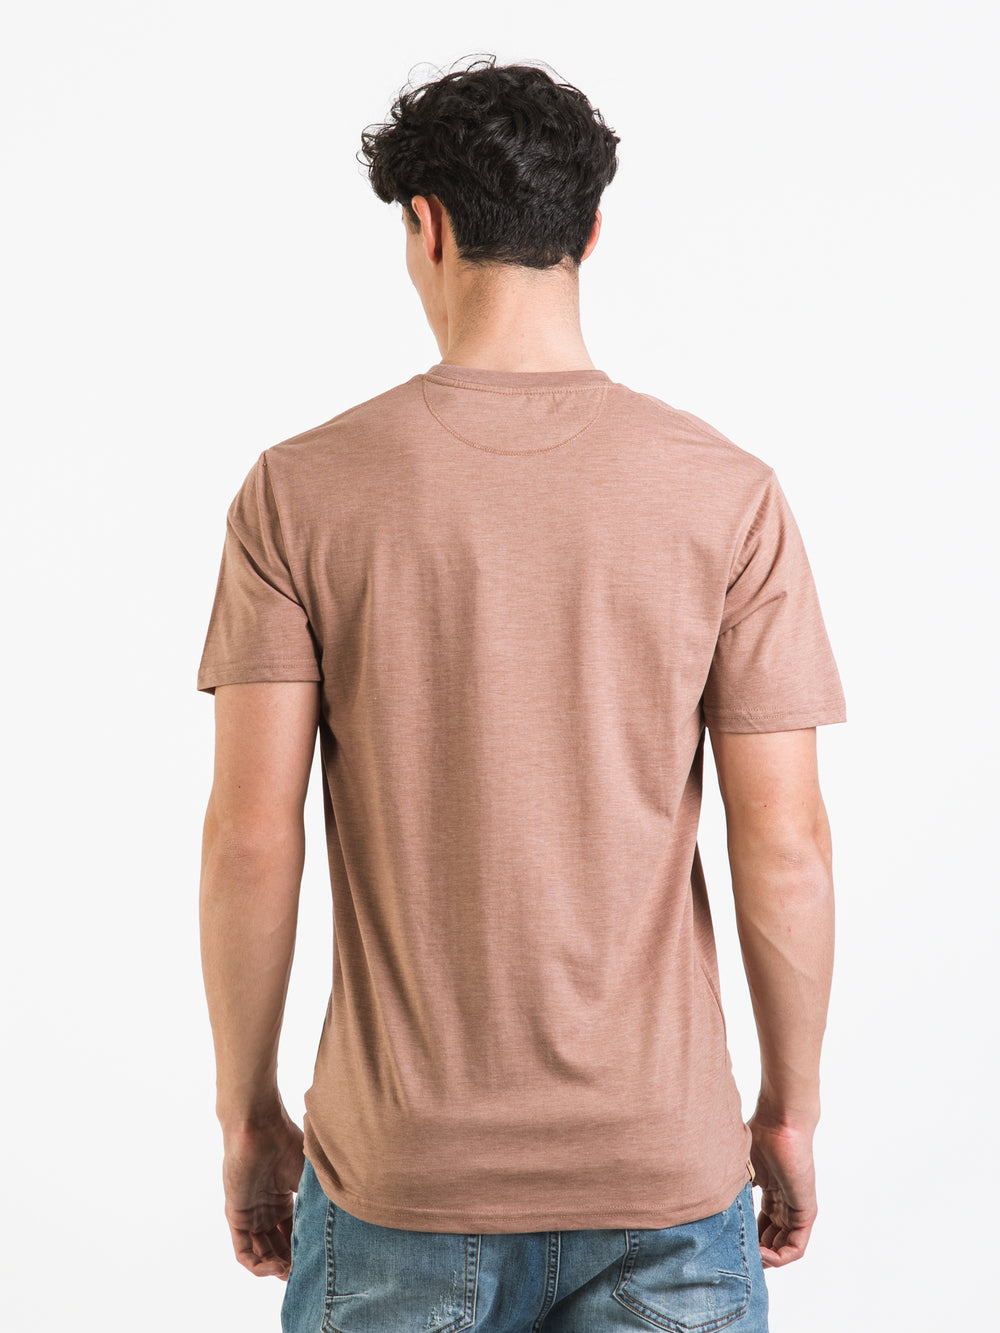 TENTREE TEN TREE WOVEN PATCH POCKET T-SHIRT - CLEARANCE